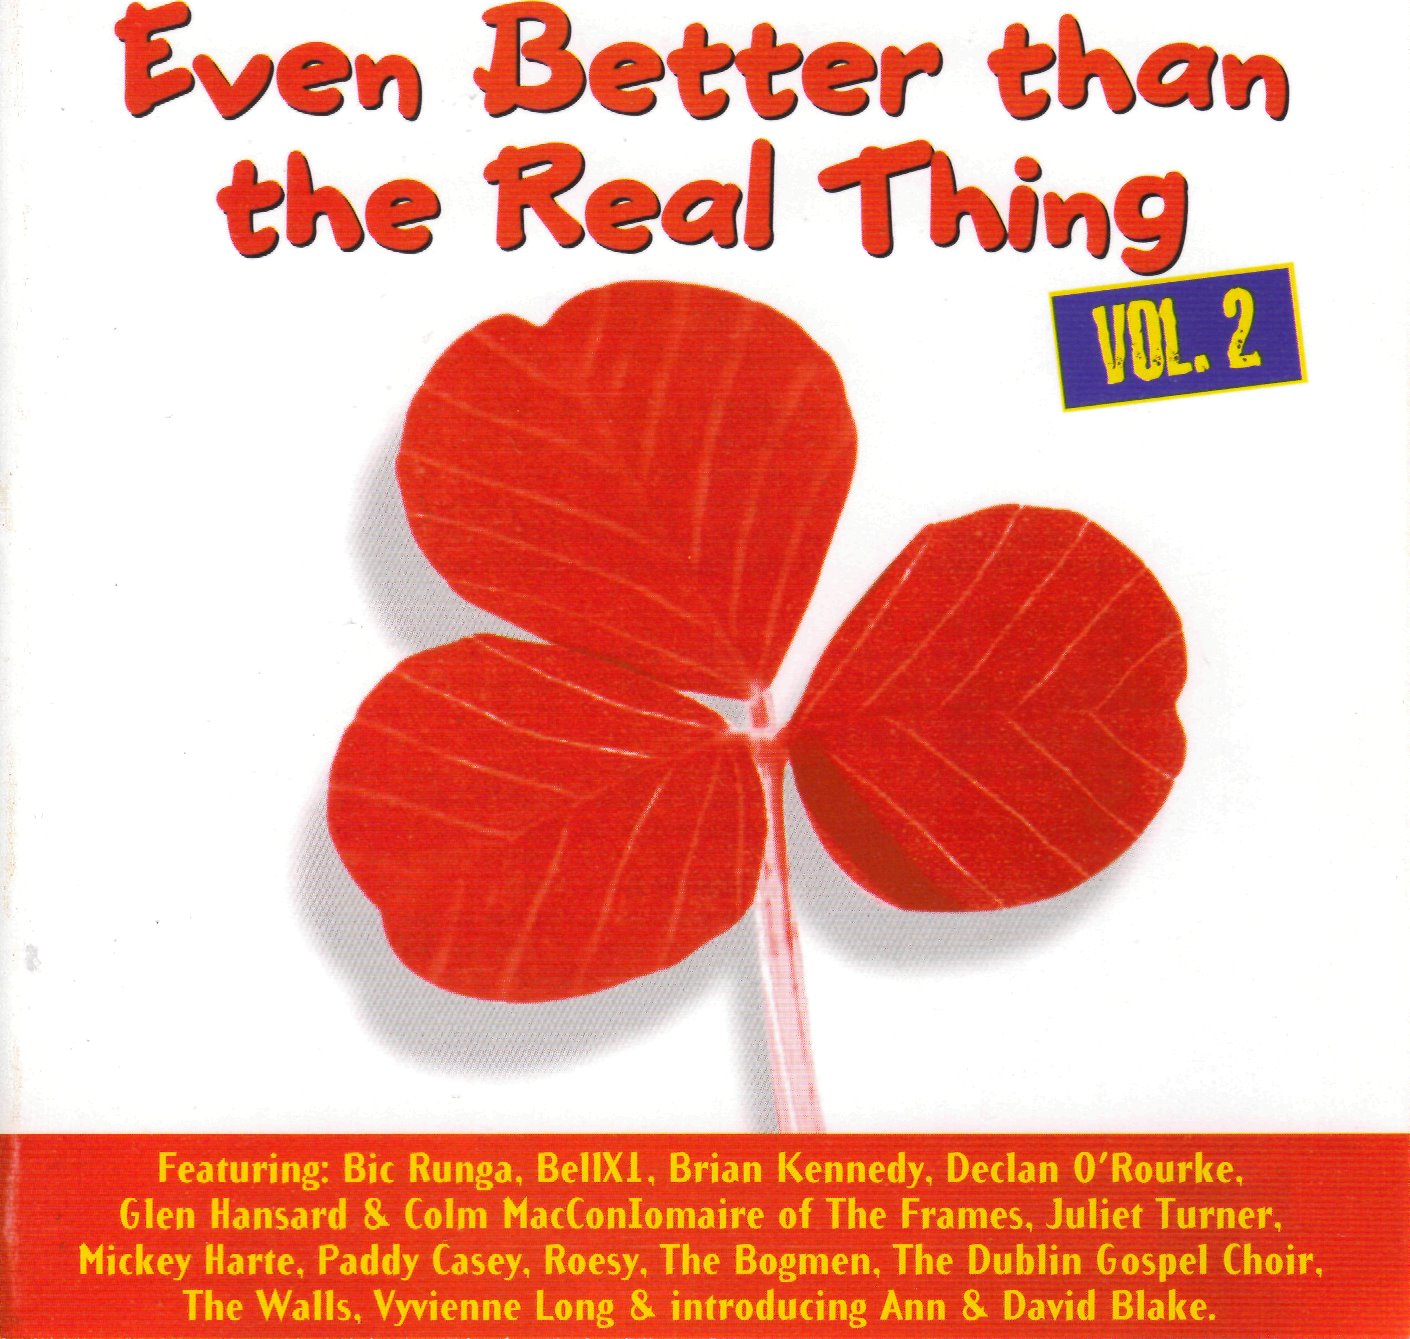 [Even+Better+Then+The+Real+Thing+Vol.2.bmp]